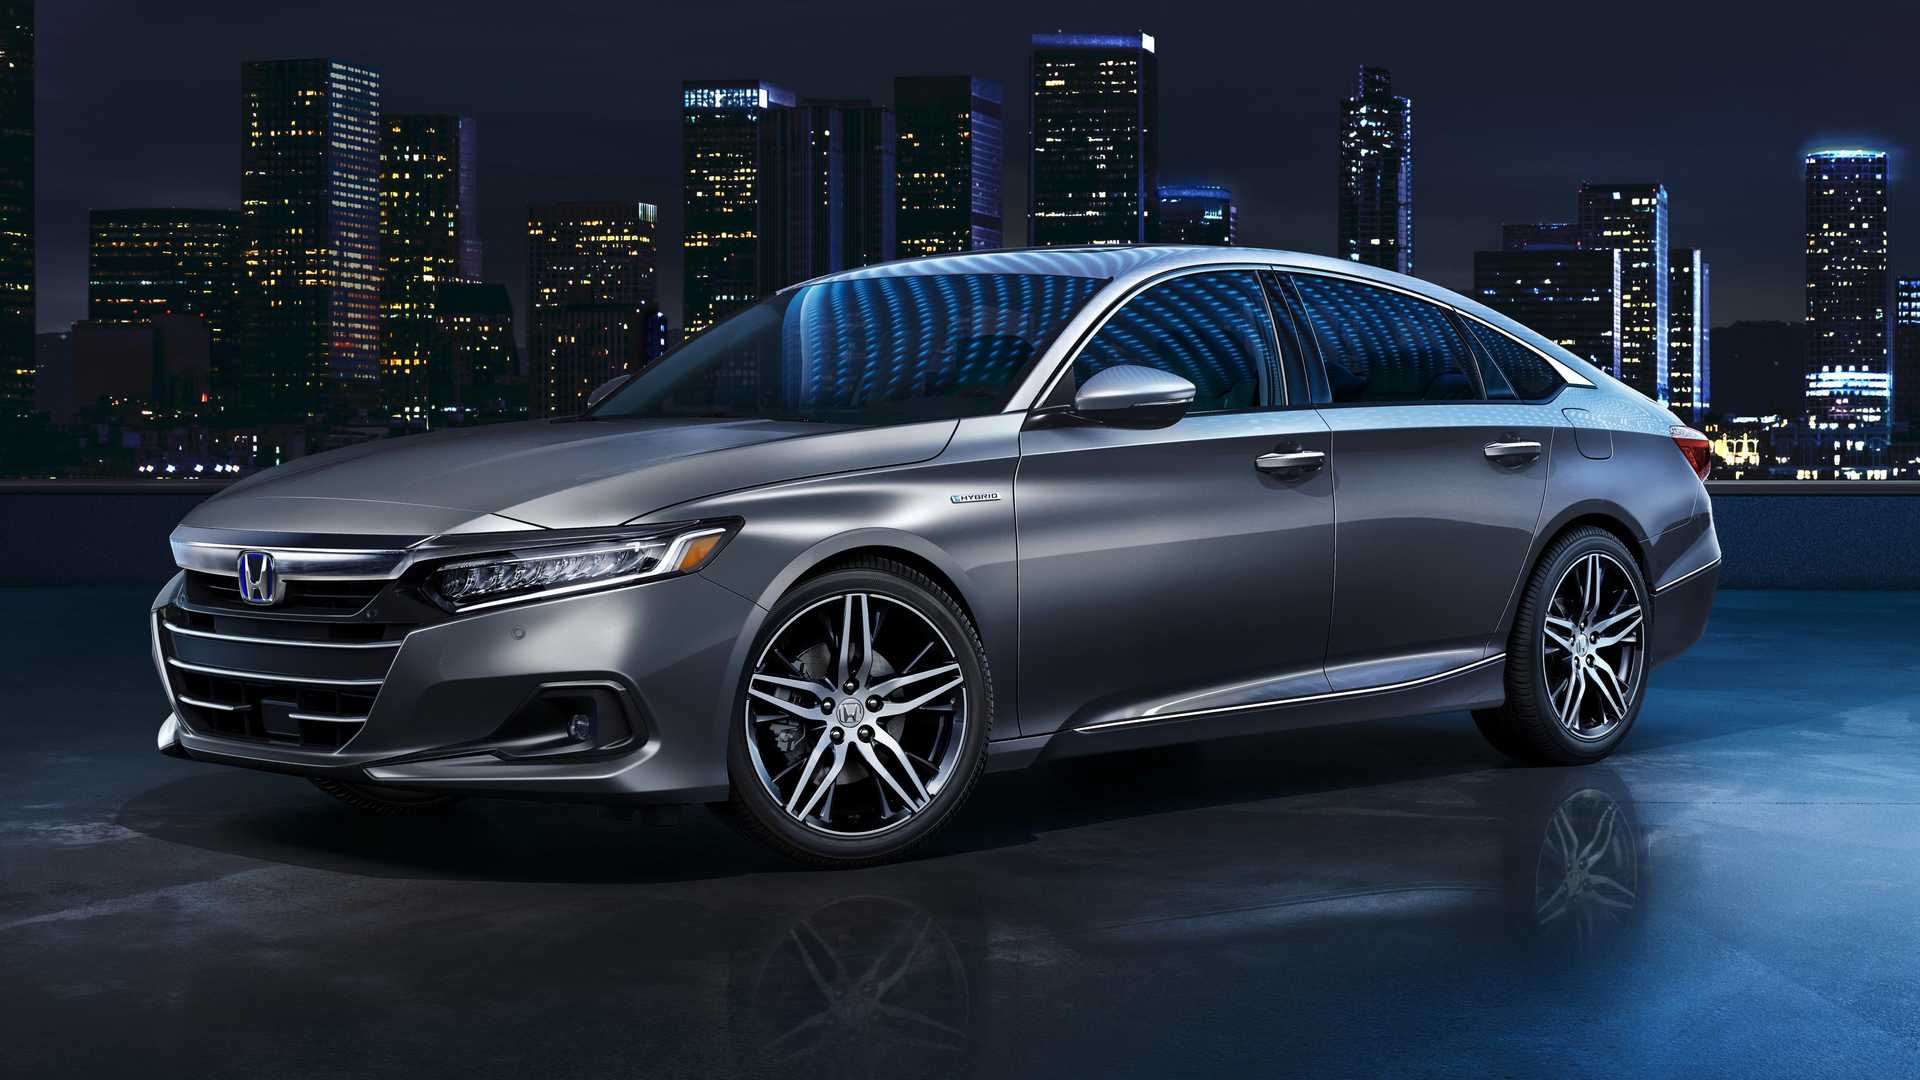 2021 Honda Accord, Refreshed With New Style And Tech